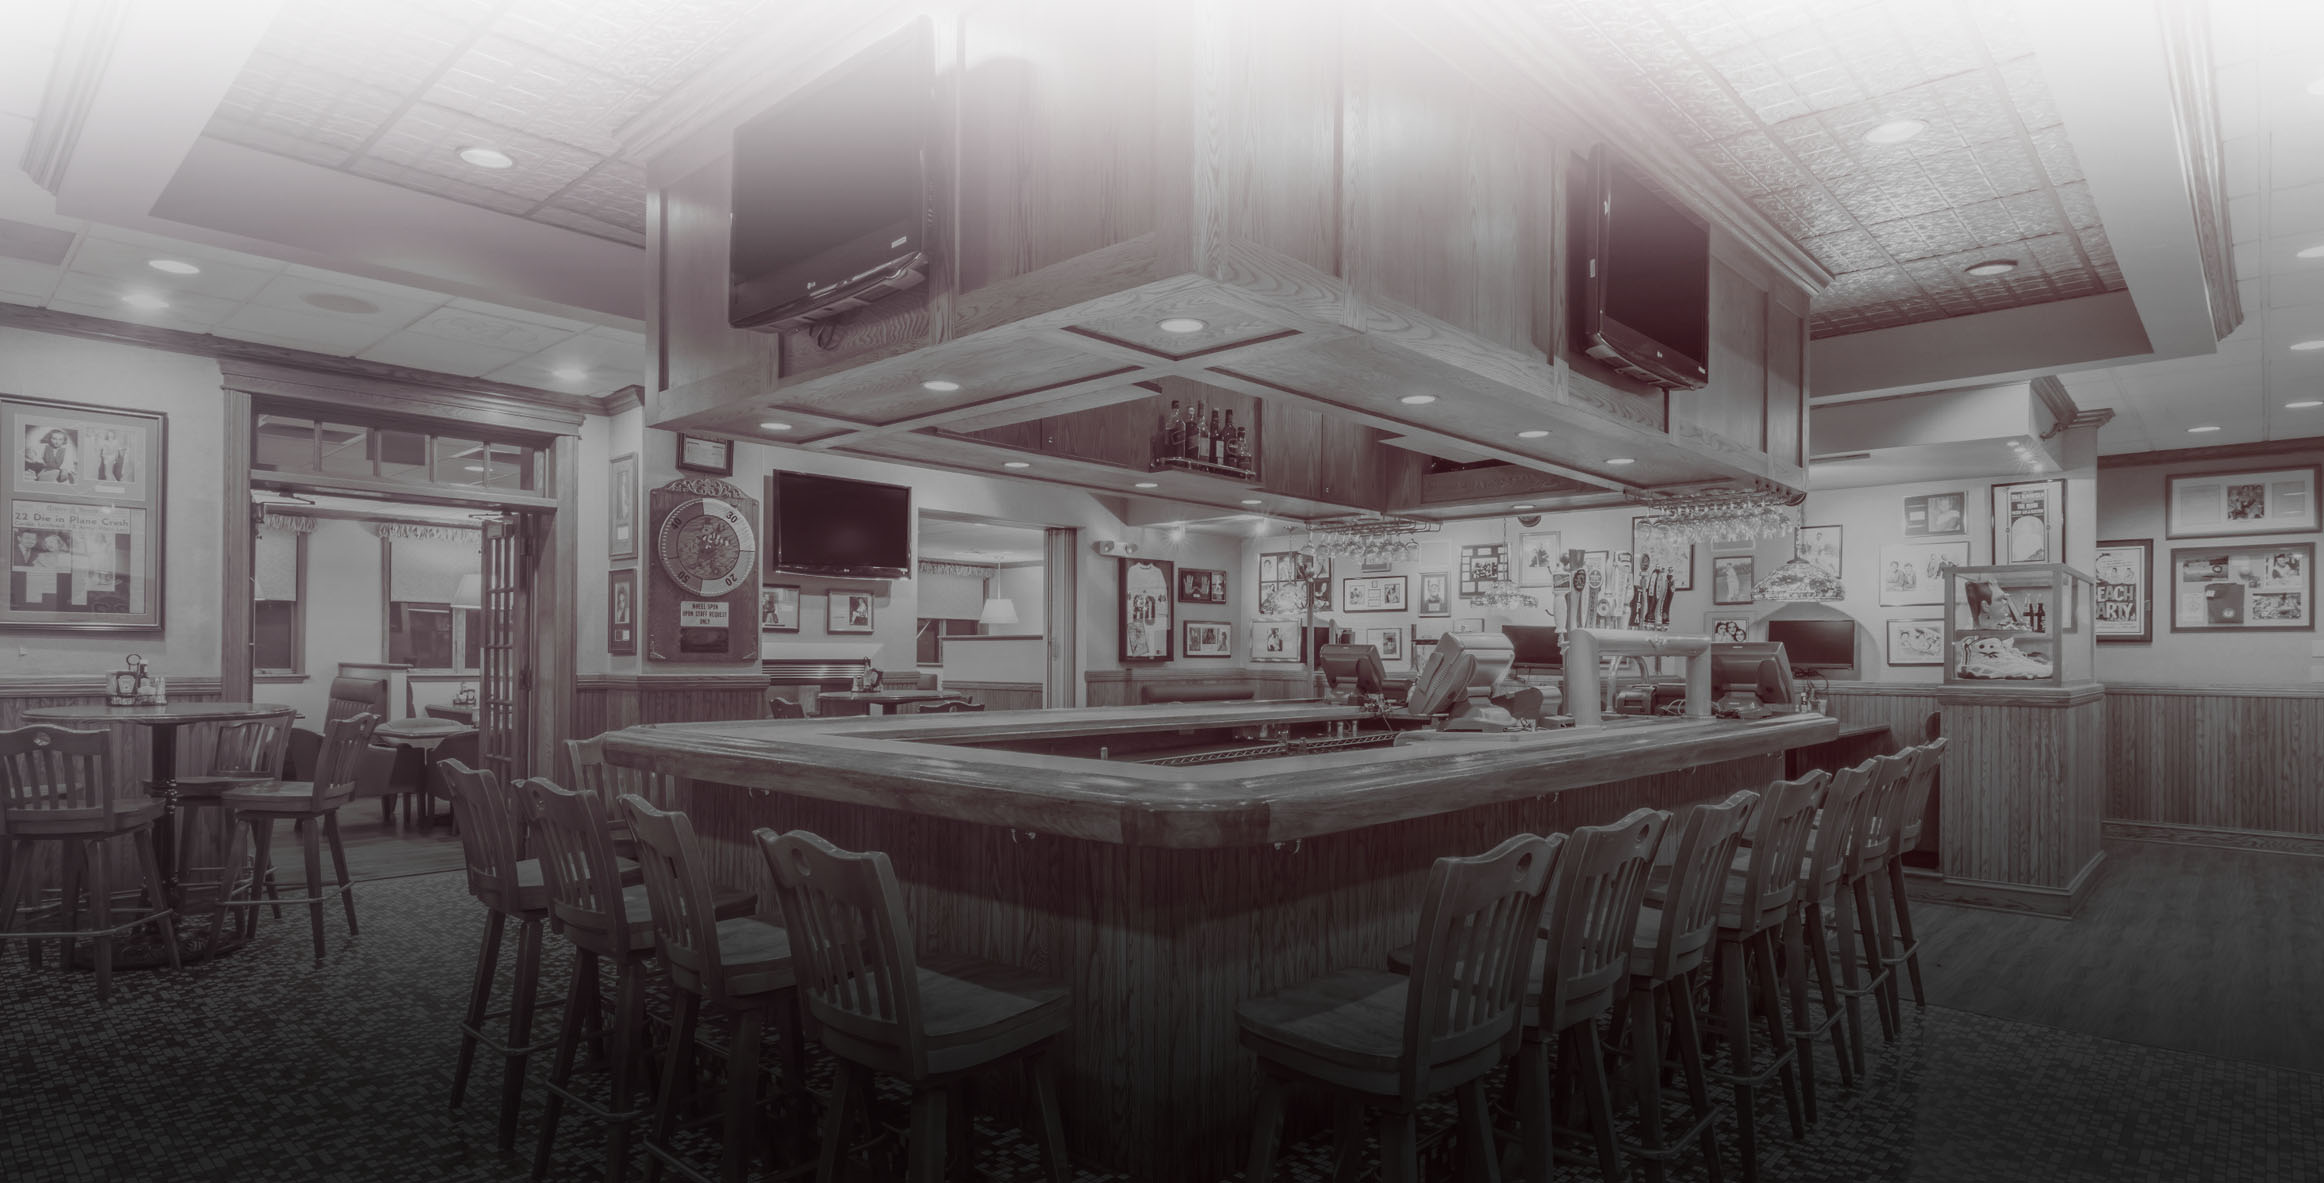 CATCH THE NEXT NITTANY LIONS GAME AT THE ON-SITE P.J. HARRIGAN’S BAR & GRILL